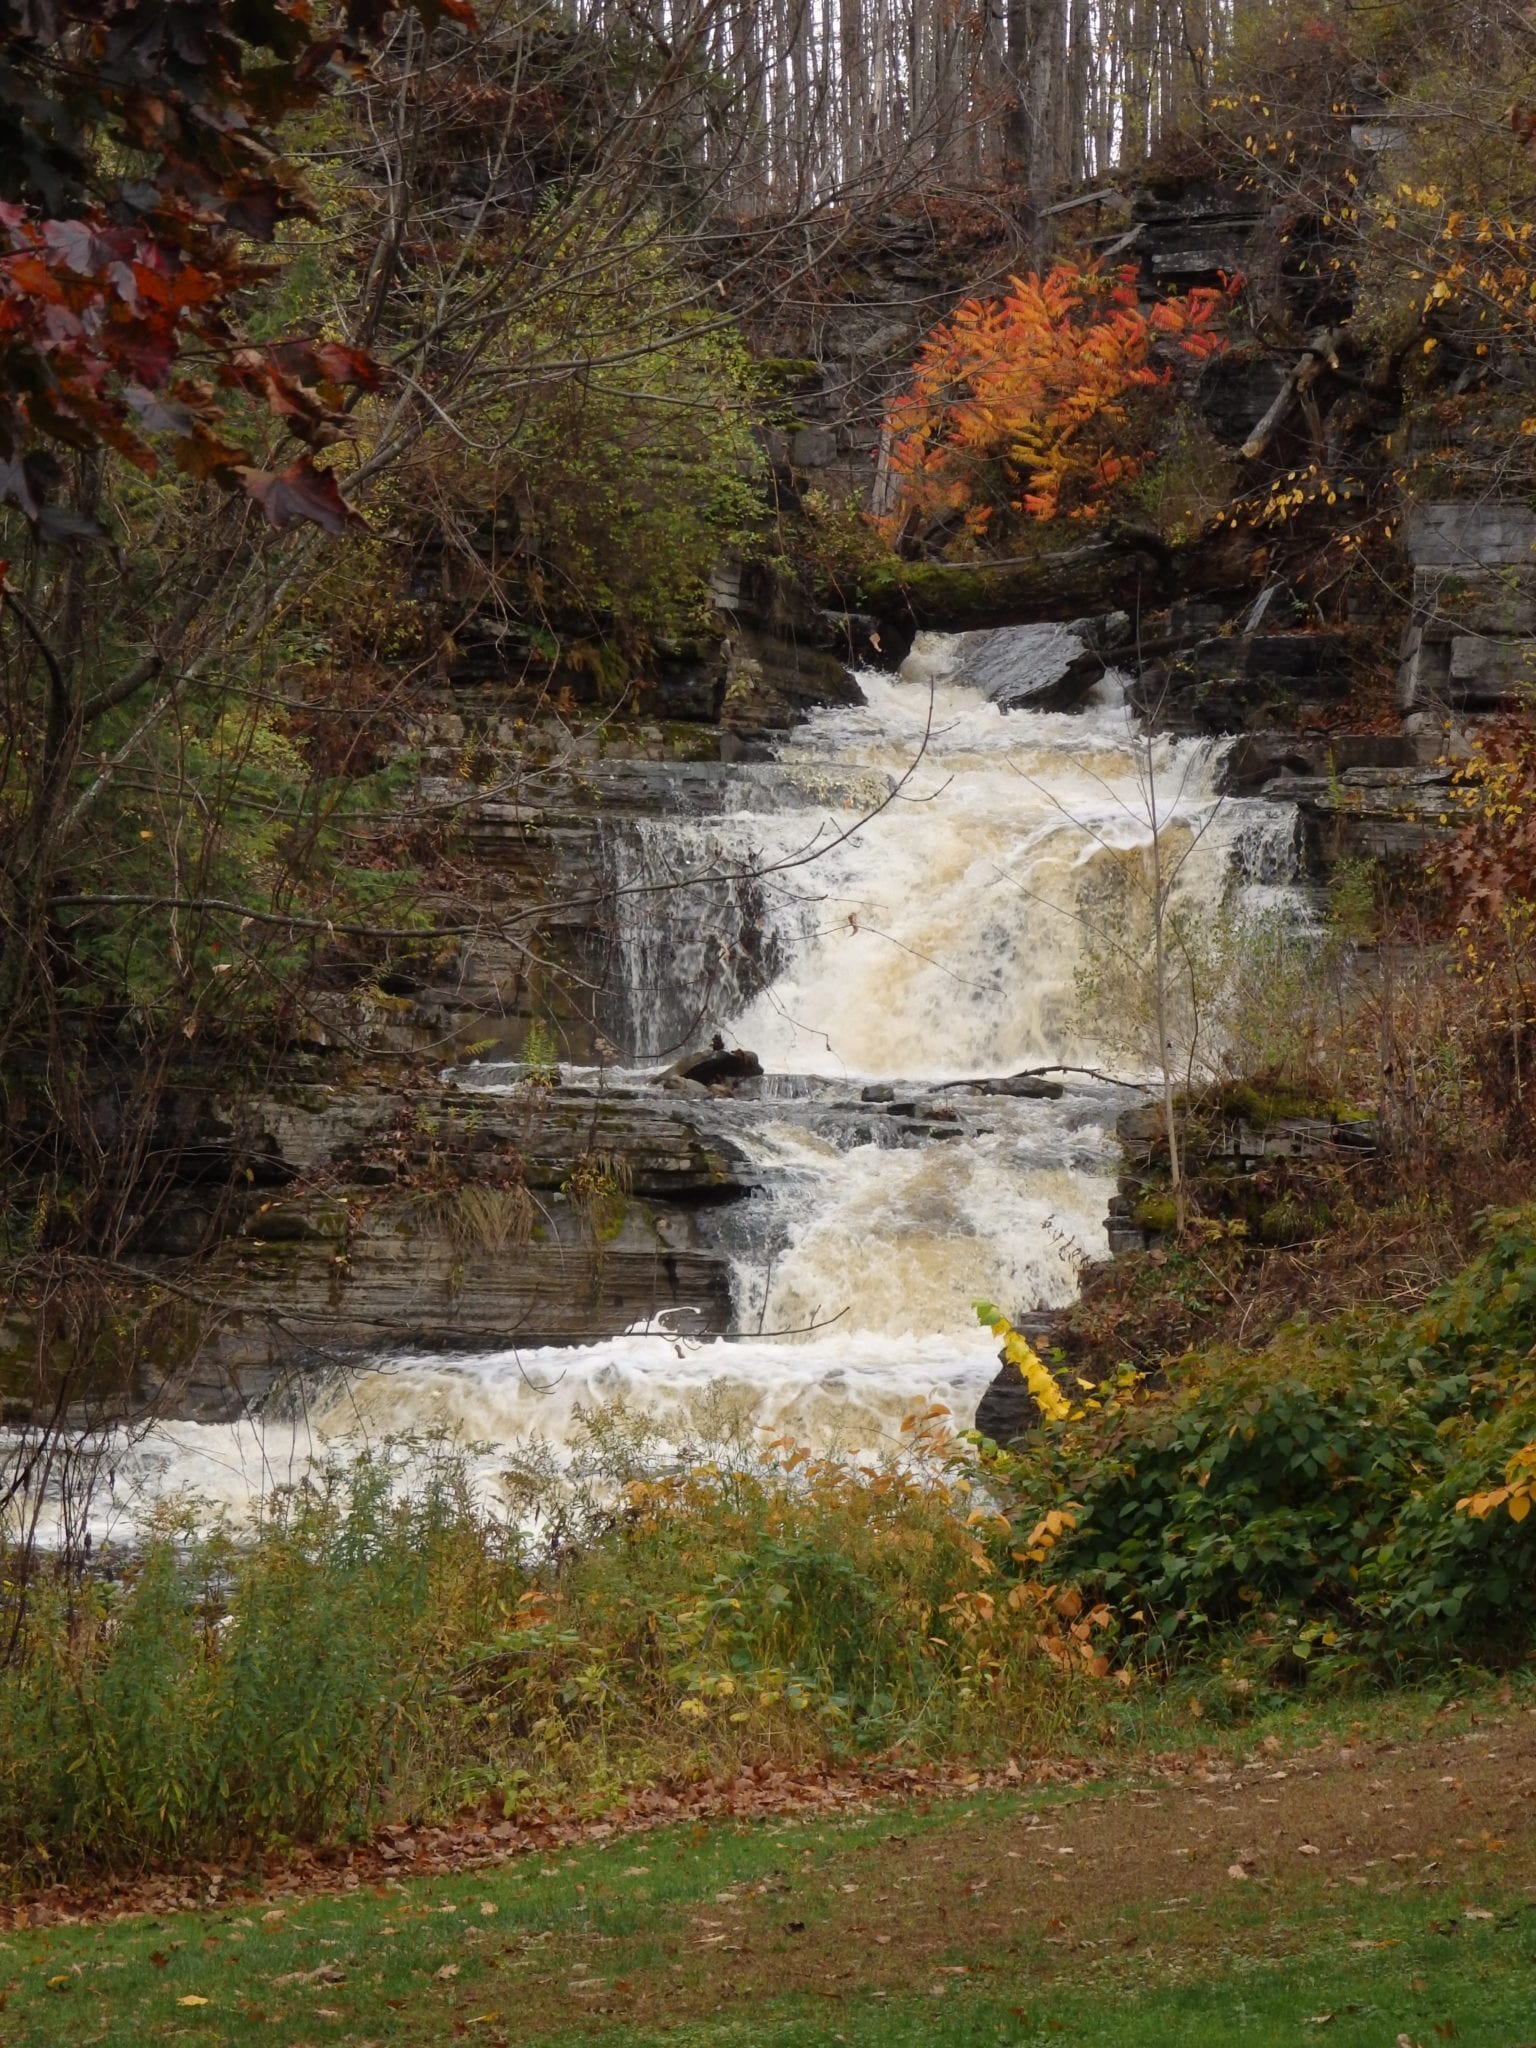 The Upstate Experience and Dig The Falls | a Dig The Falls Channel Partner